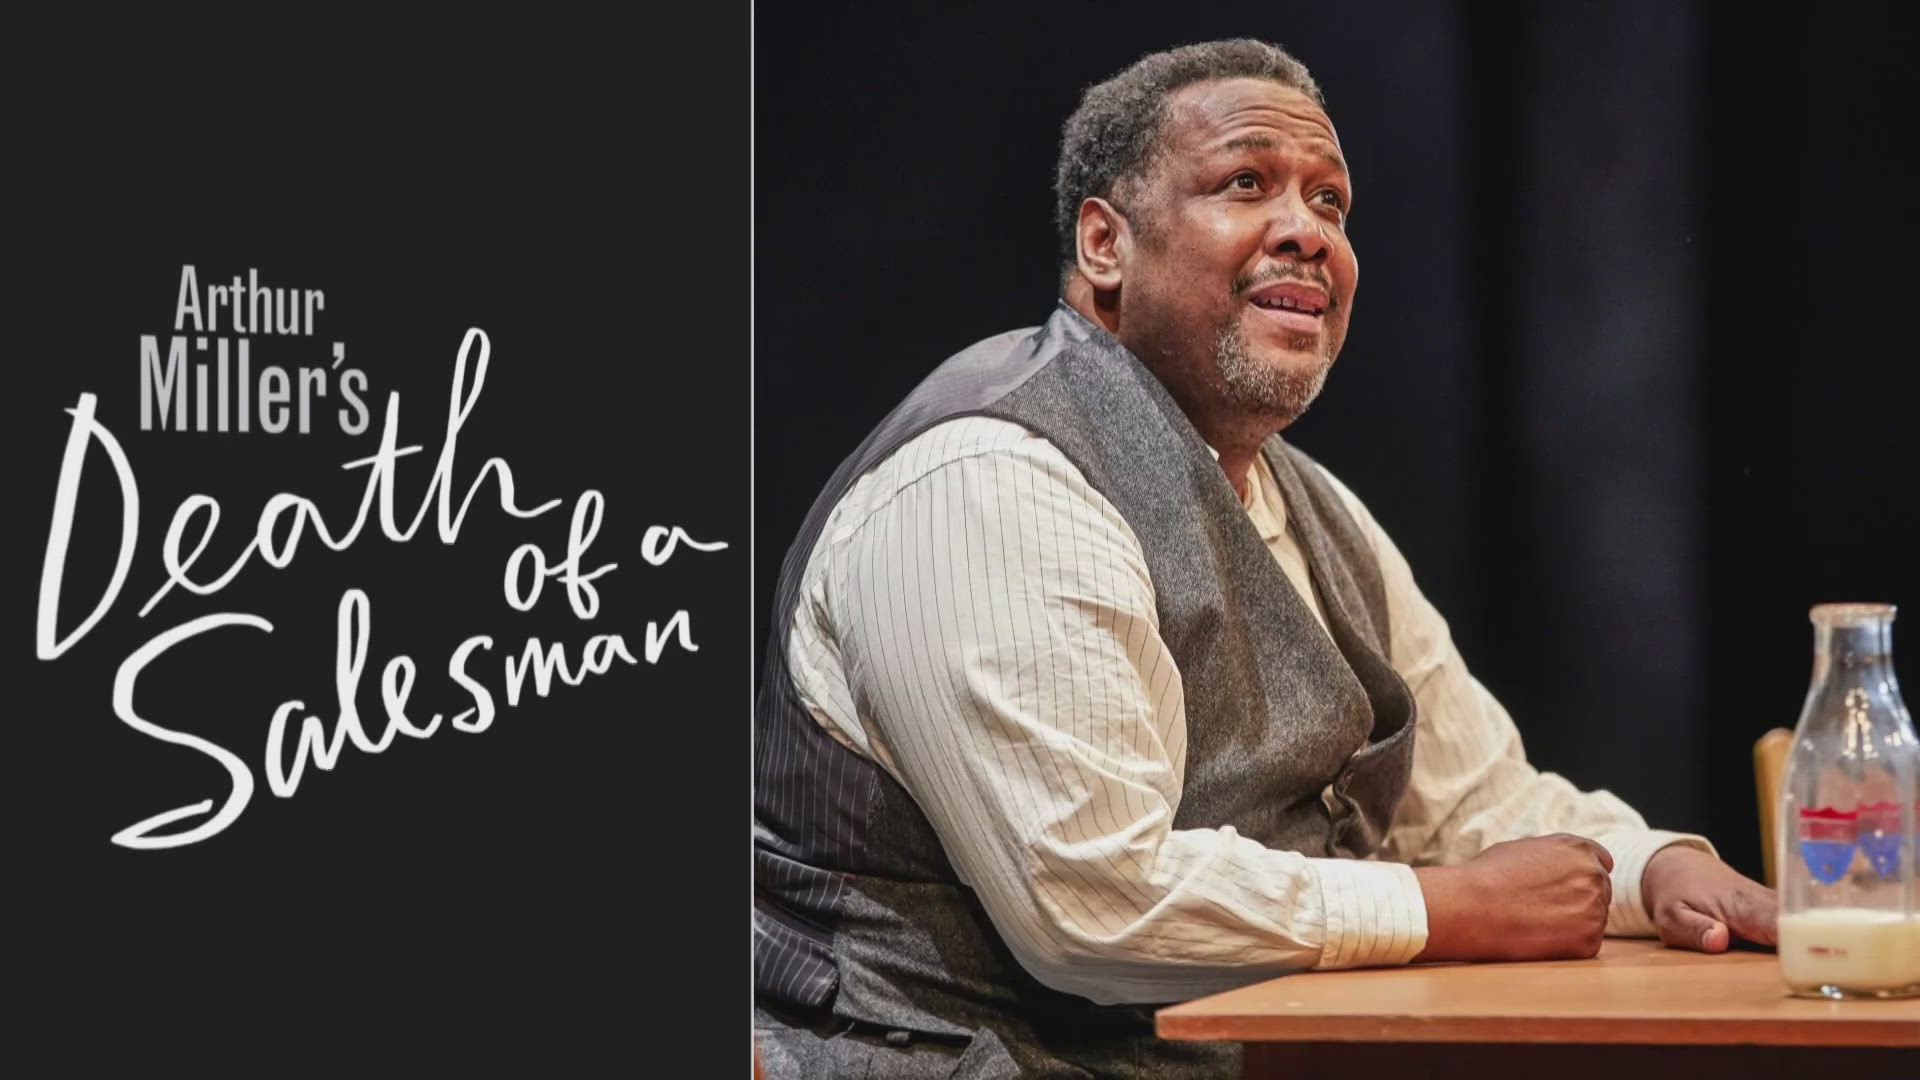 New Orleans actor Wendell Pierce has acted on stage and screens large and small and he now has a Tony nomination for what he calls "the role of a lifetime."